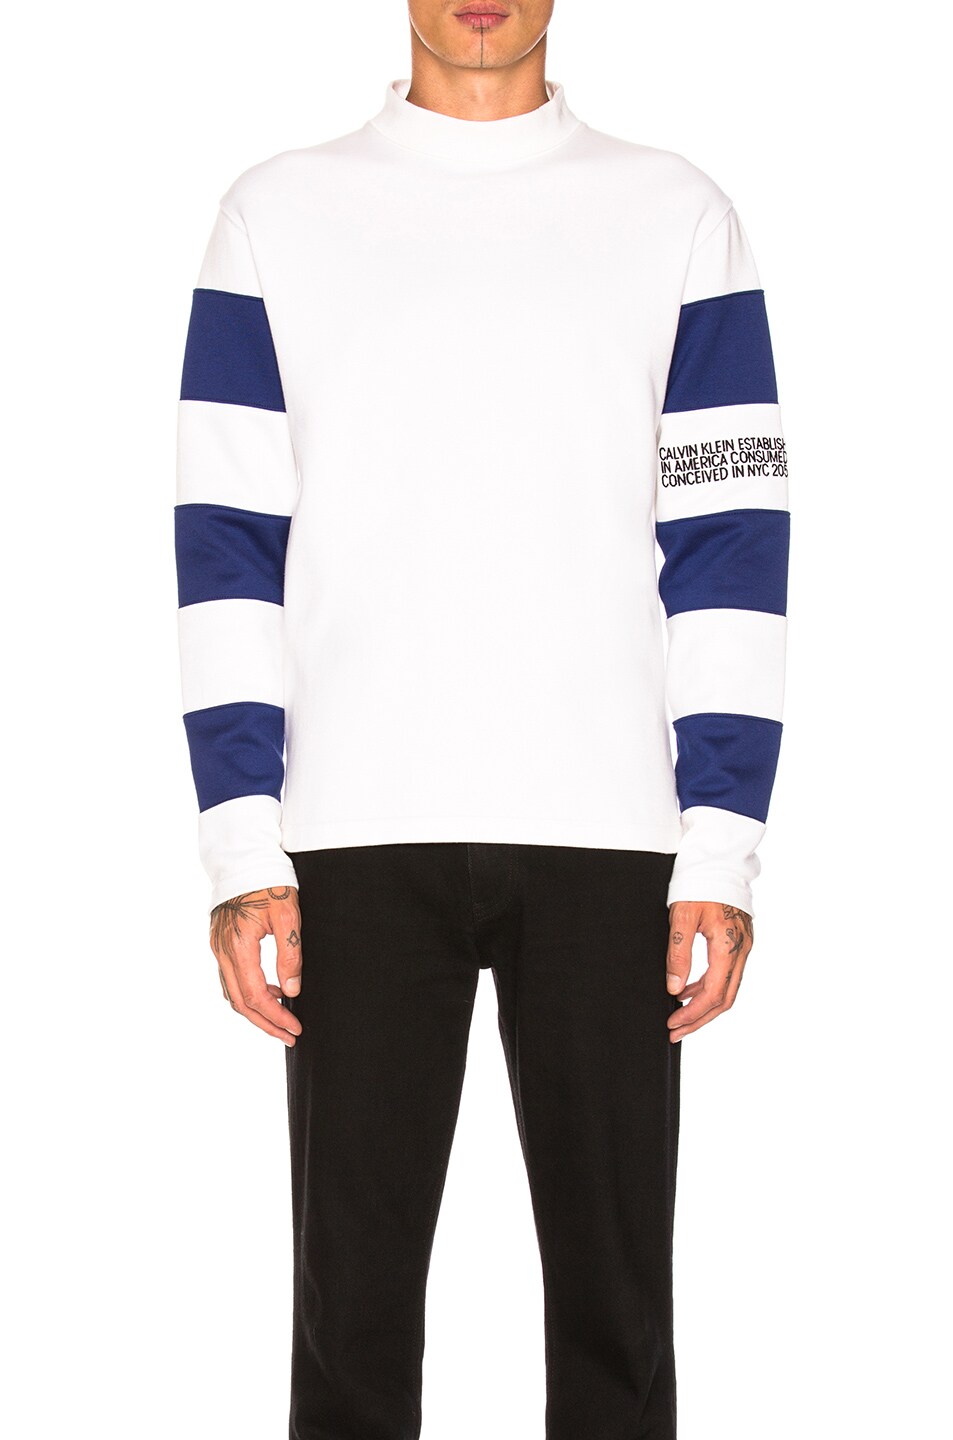 Image 1 of CALVIN KLEIN 205W39NYC Striped Sleeve Mock Tee in White & Blue